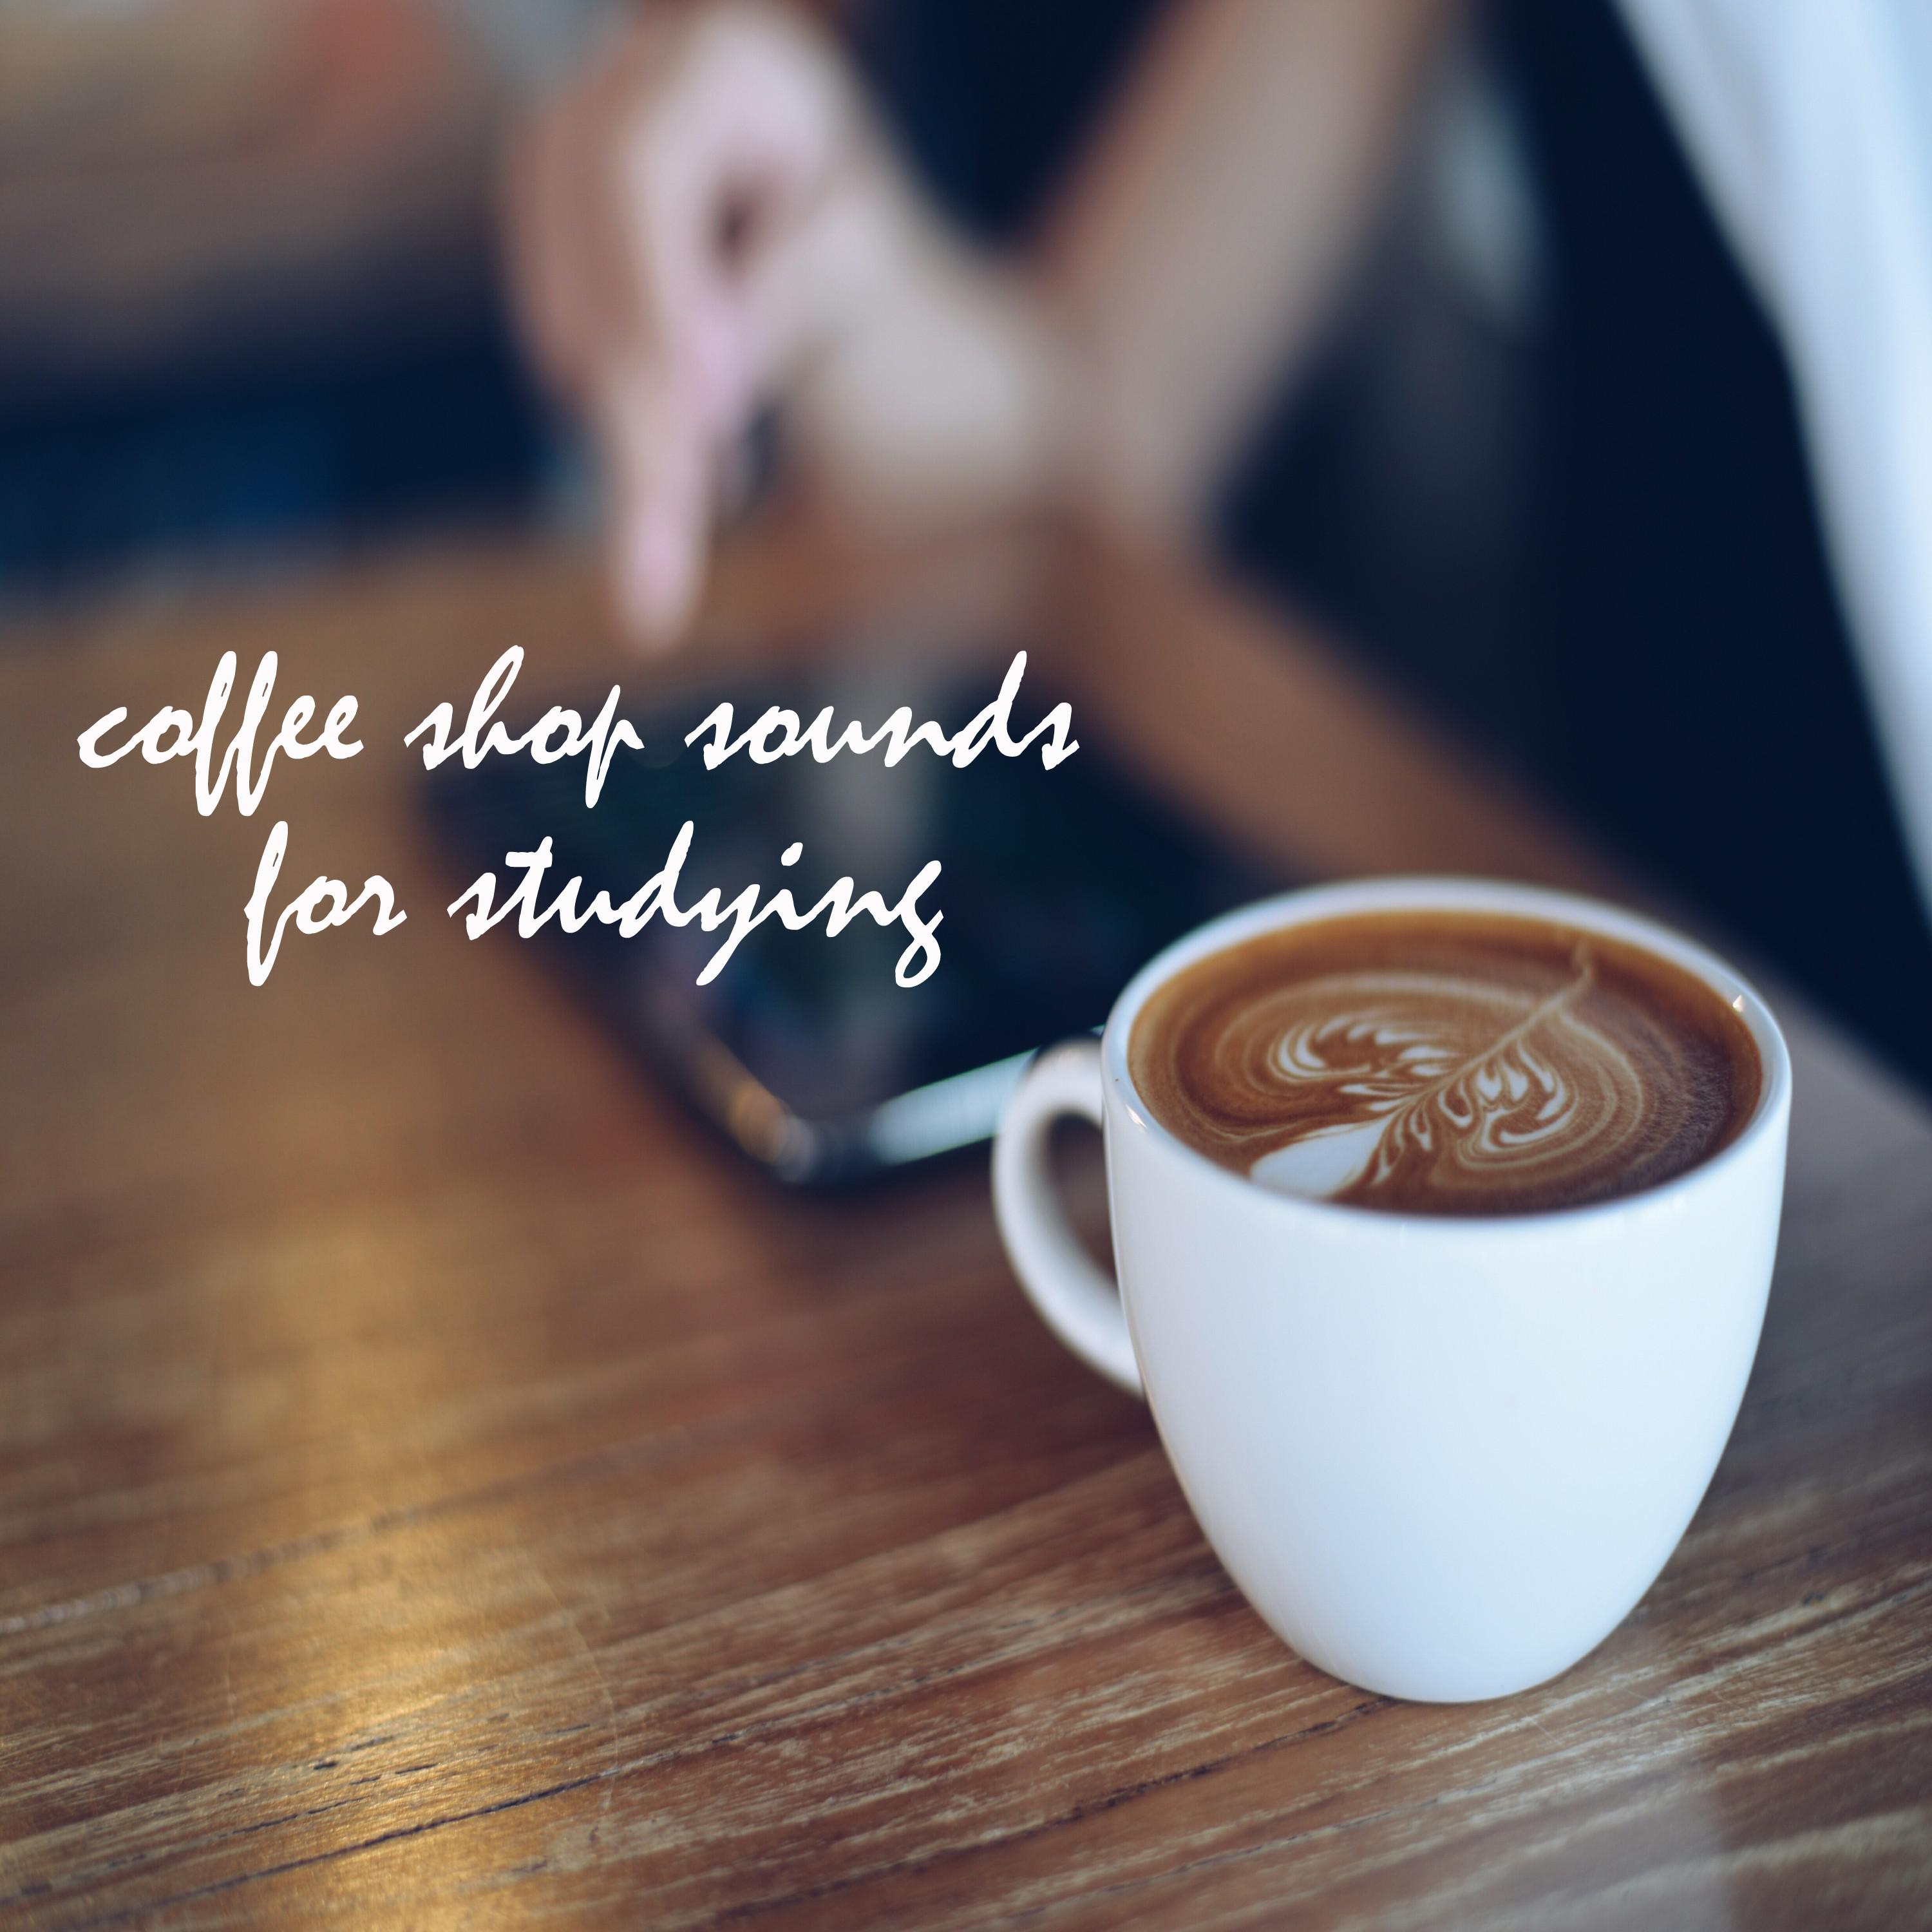 Coffee Shop Sounds for Studying and Working, Pt. 38